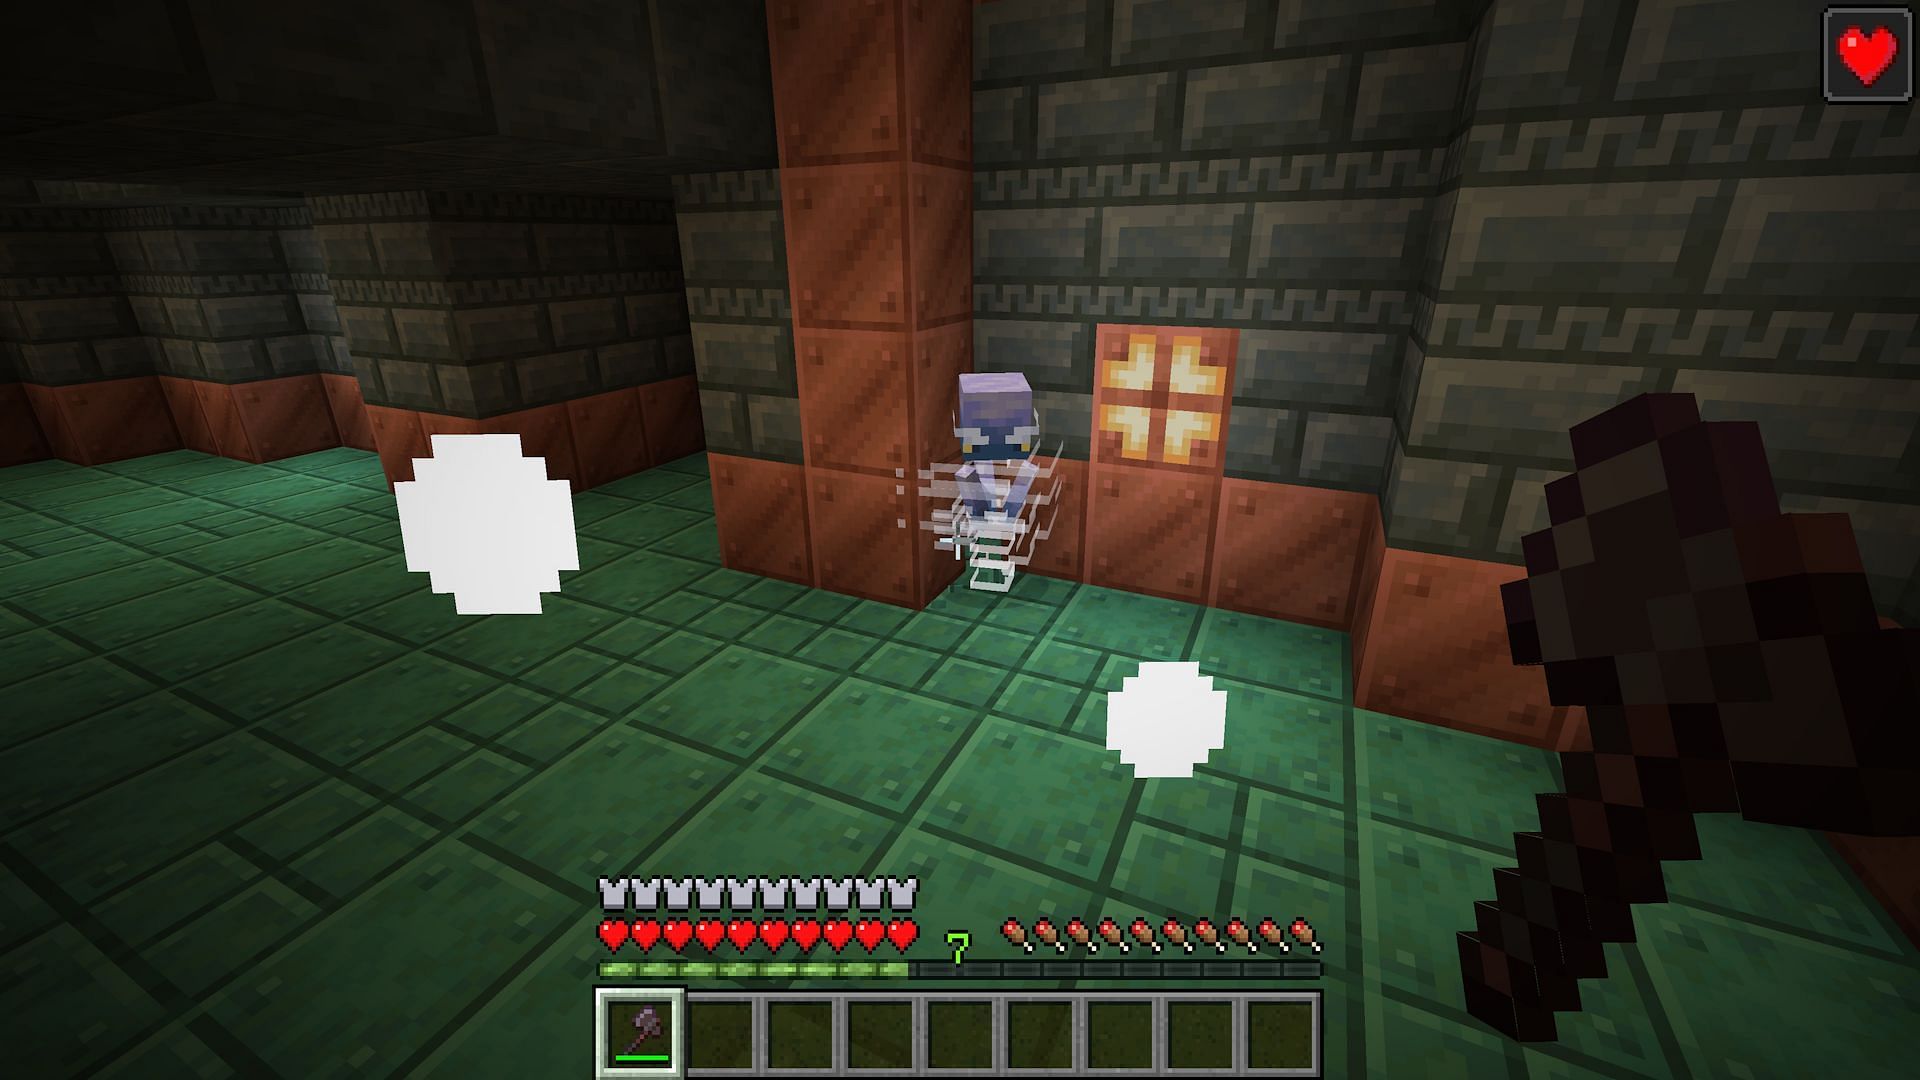 Fighting a breeze in a trial chamber (Image via Mojang)